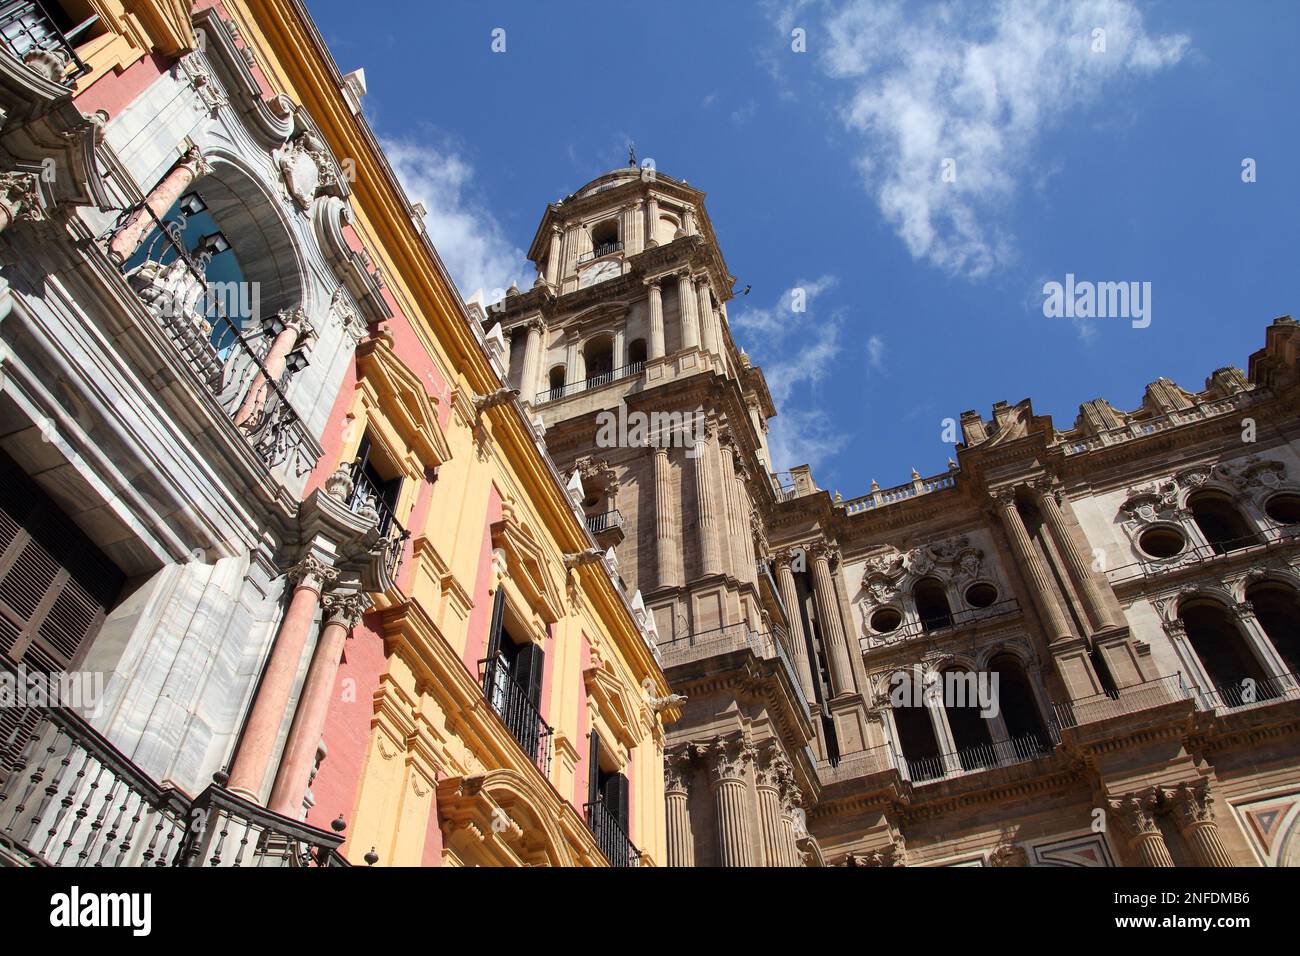 Malaga landmark architecture in Andalusia region of Spain. Cathedral exterior. Spain landmarks. Stock Photo